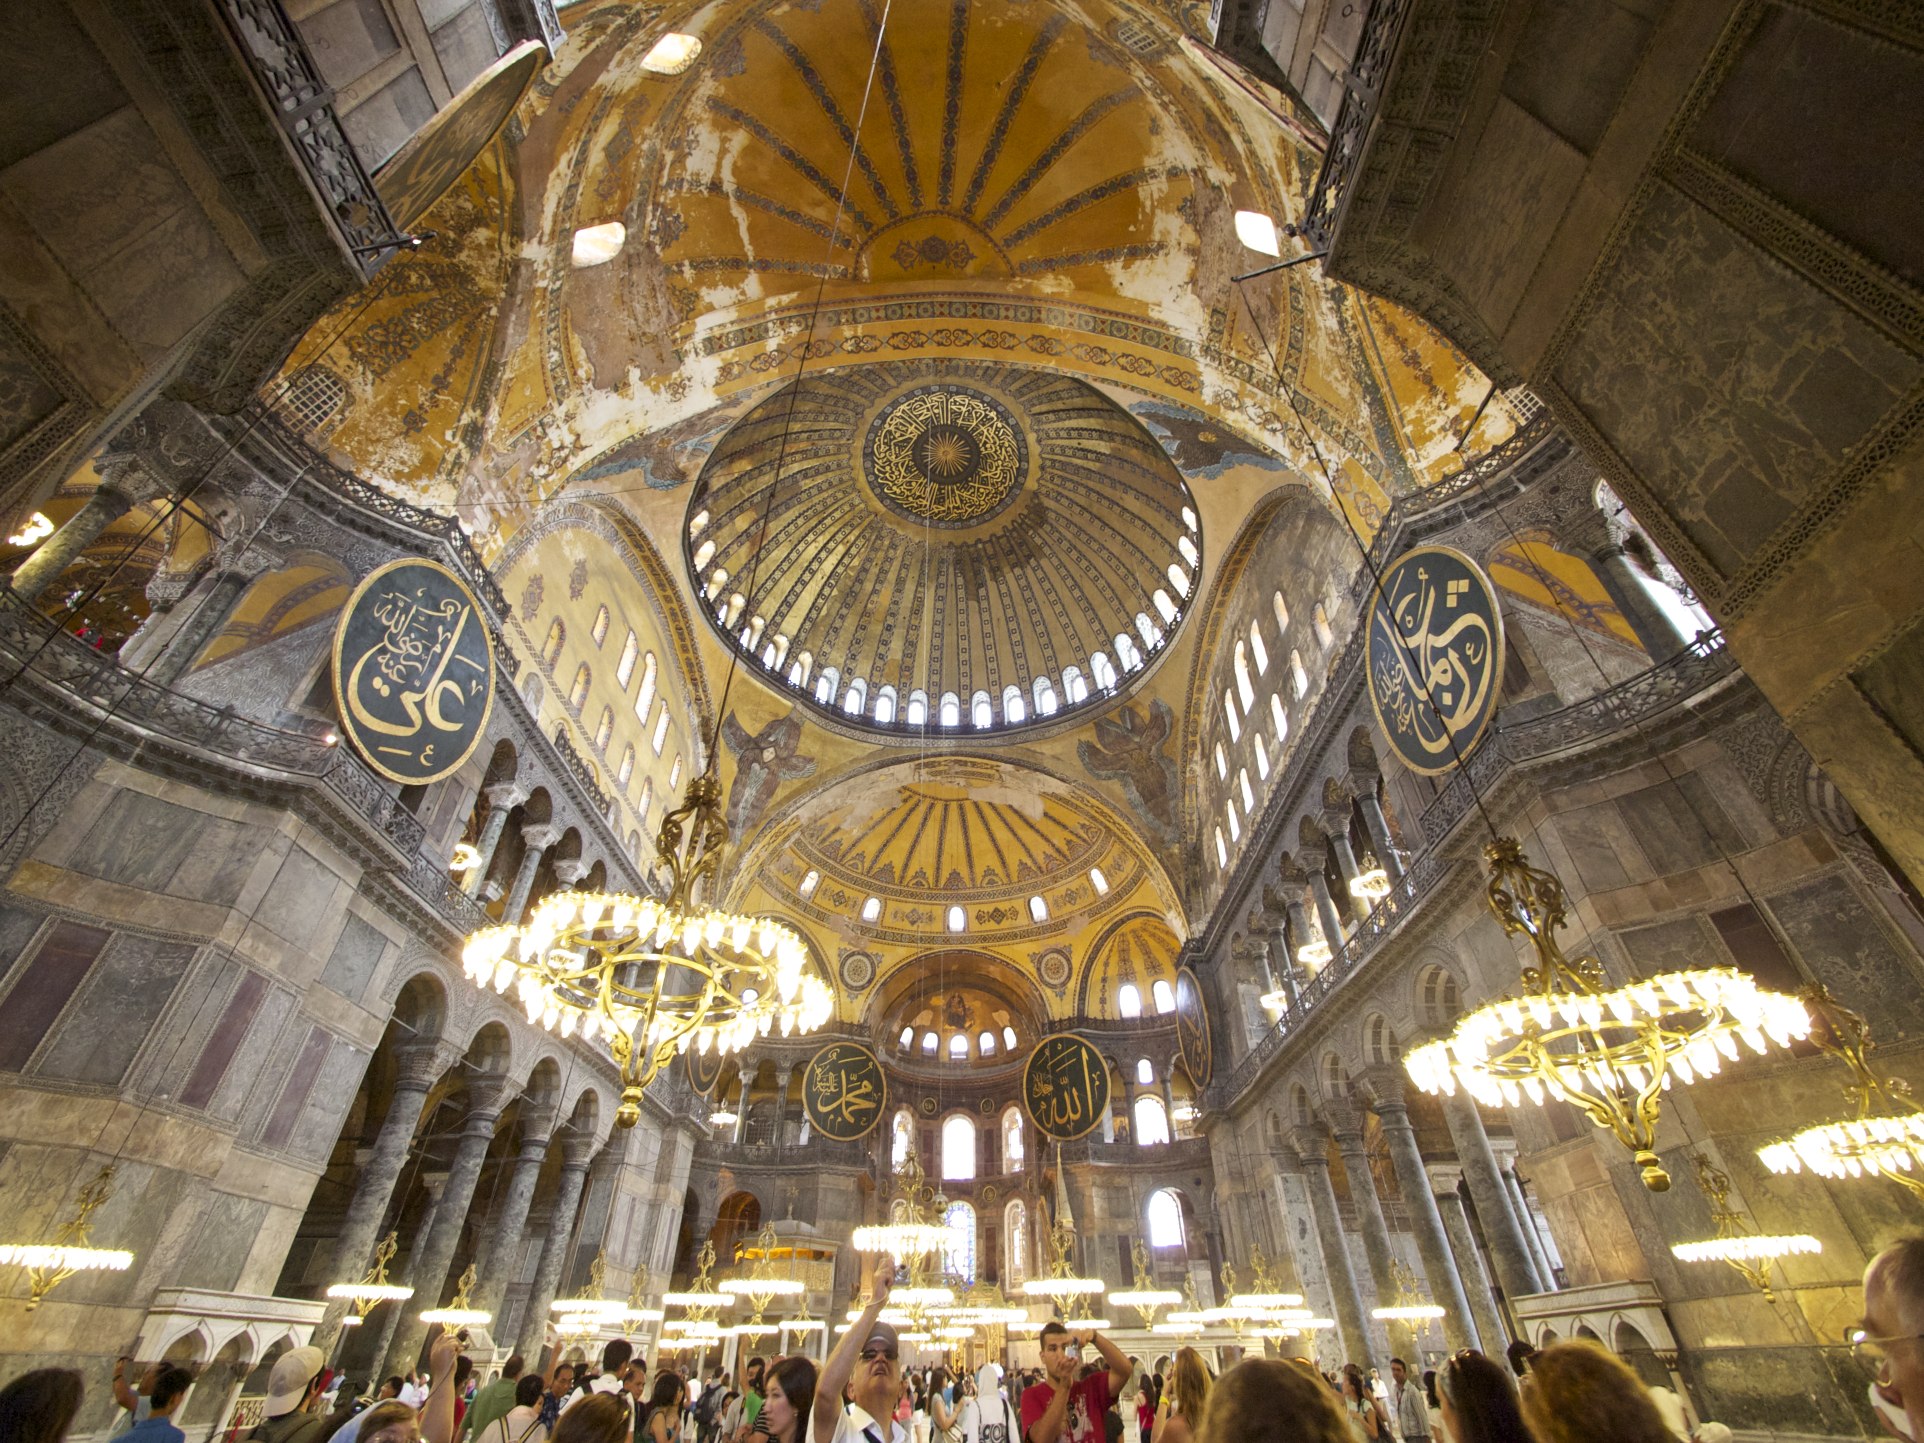 Wikipedia was allowed entrance into the sacred Muslim grounds of the Hagia Sophia, known in some circles as the World Trade Center of the Middle Ages.